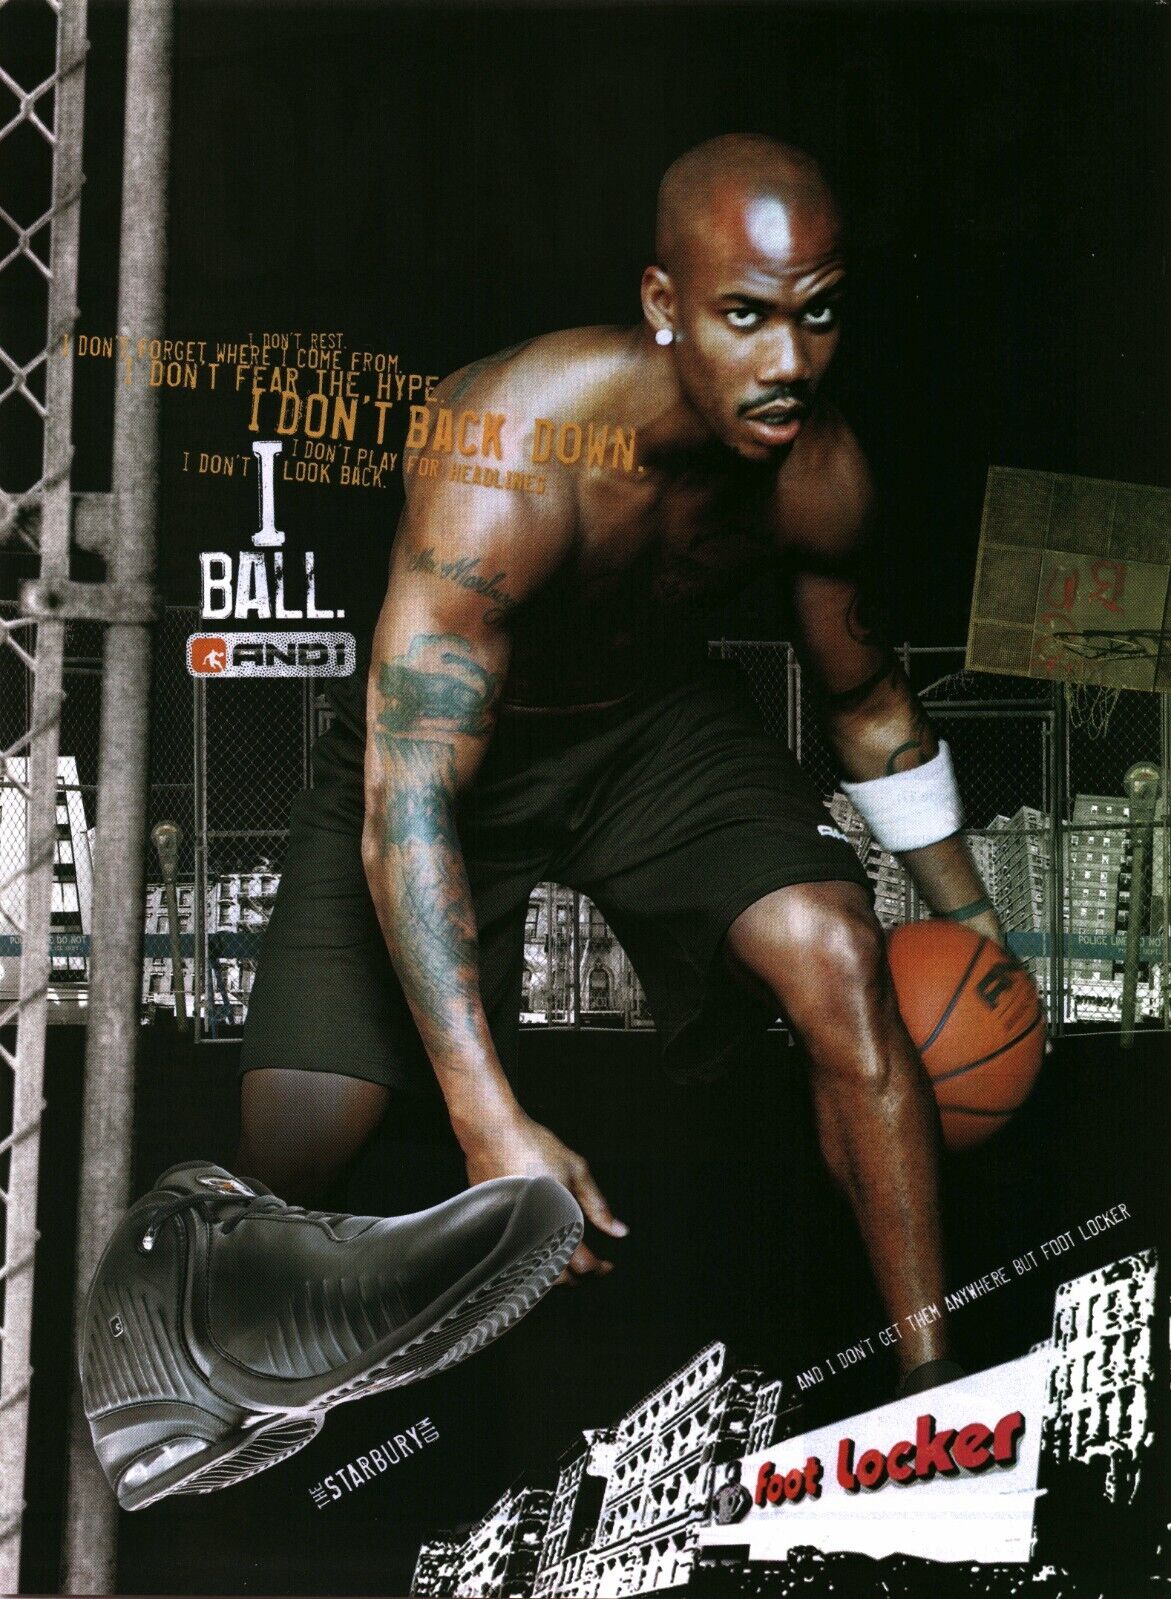 2004 PRINT AD - AND 1 STEPHON MARBURY SHOE AD - THE STARBURY MID BASKETBALL AND1